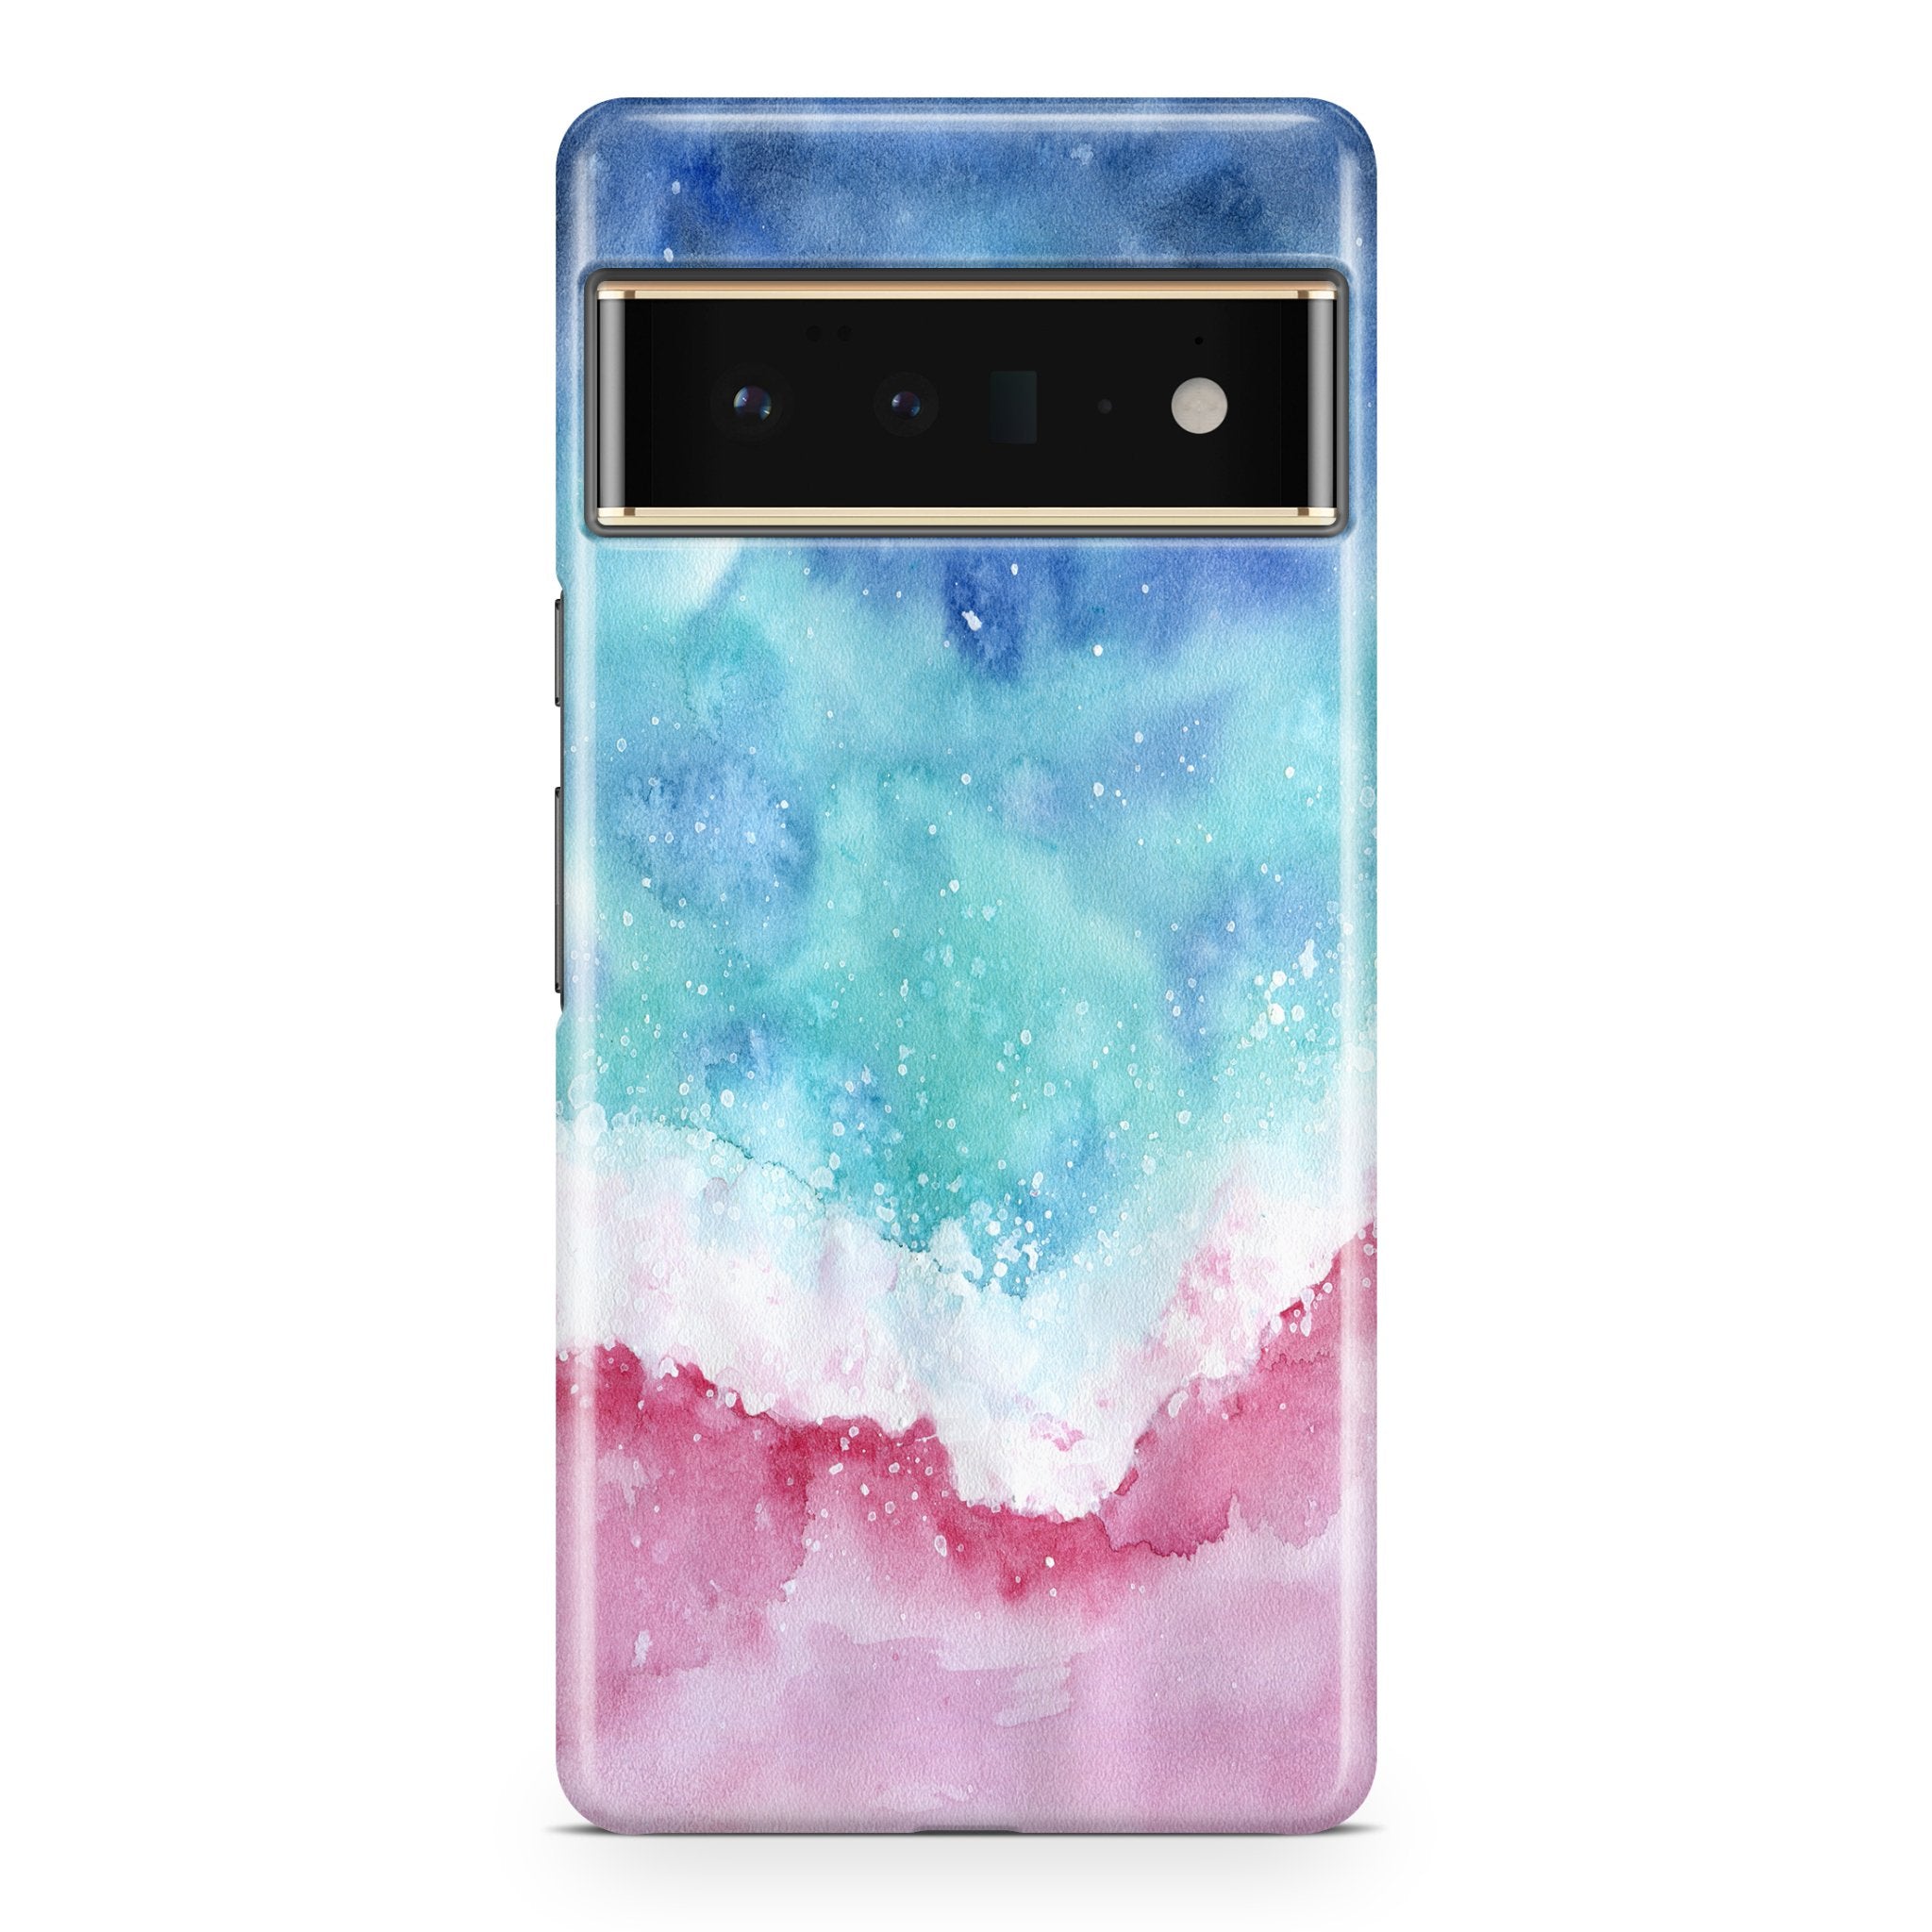 WaterColor Beach - Google phone case designs by CaseSwagger